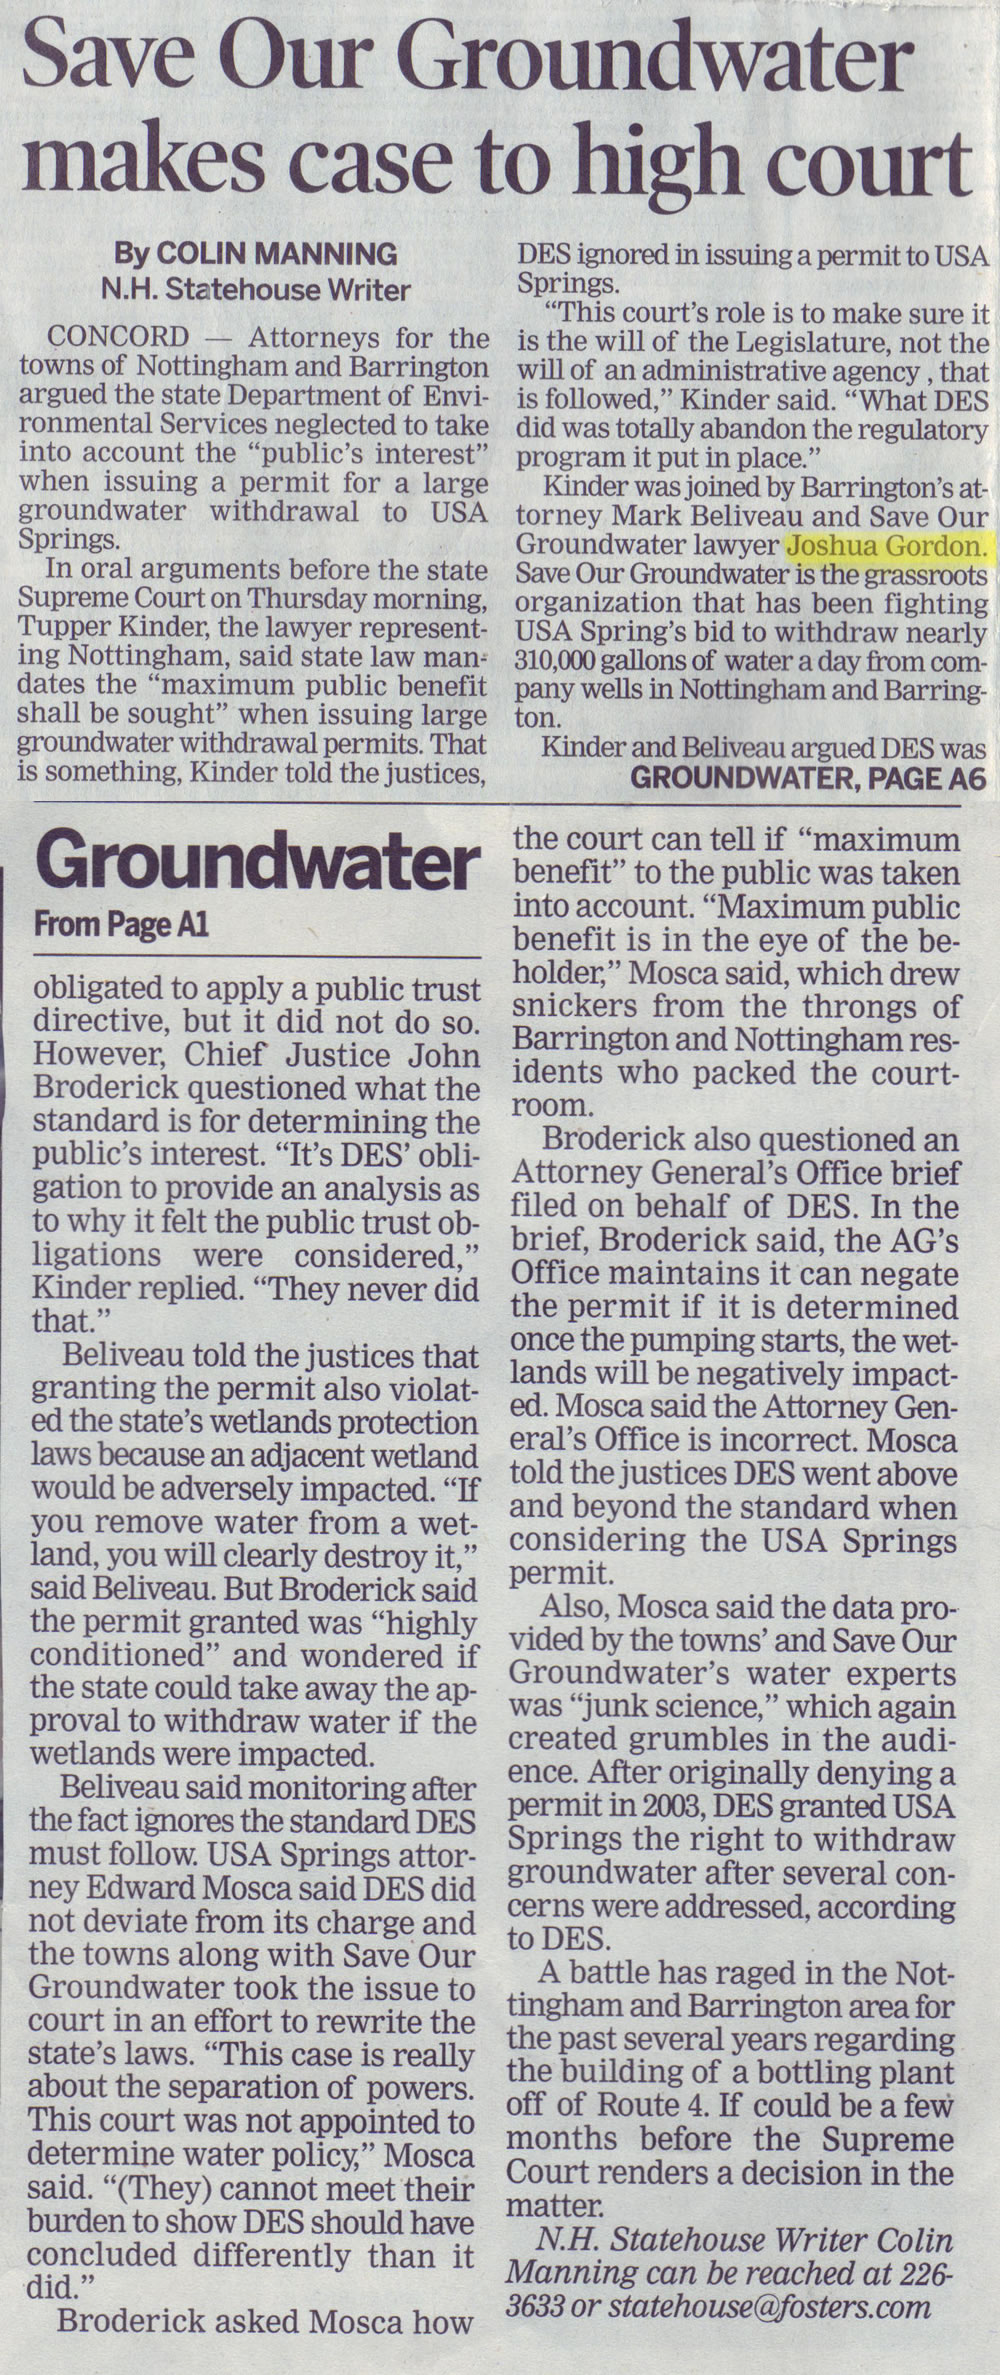 Save Our Groundwater